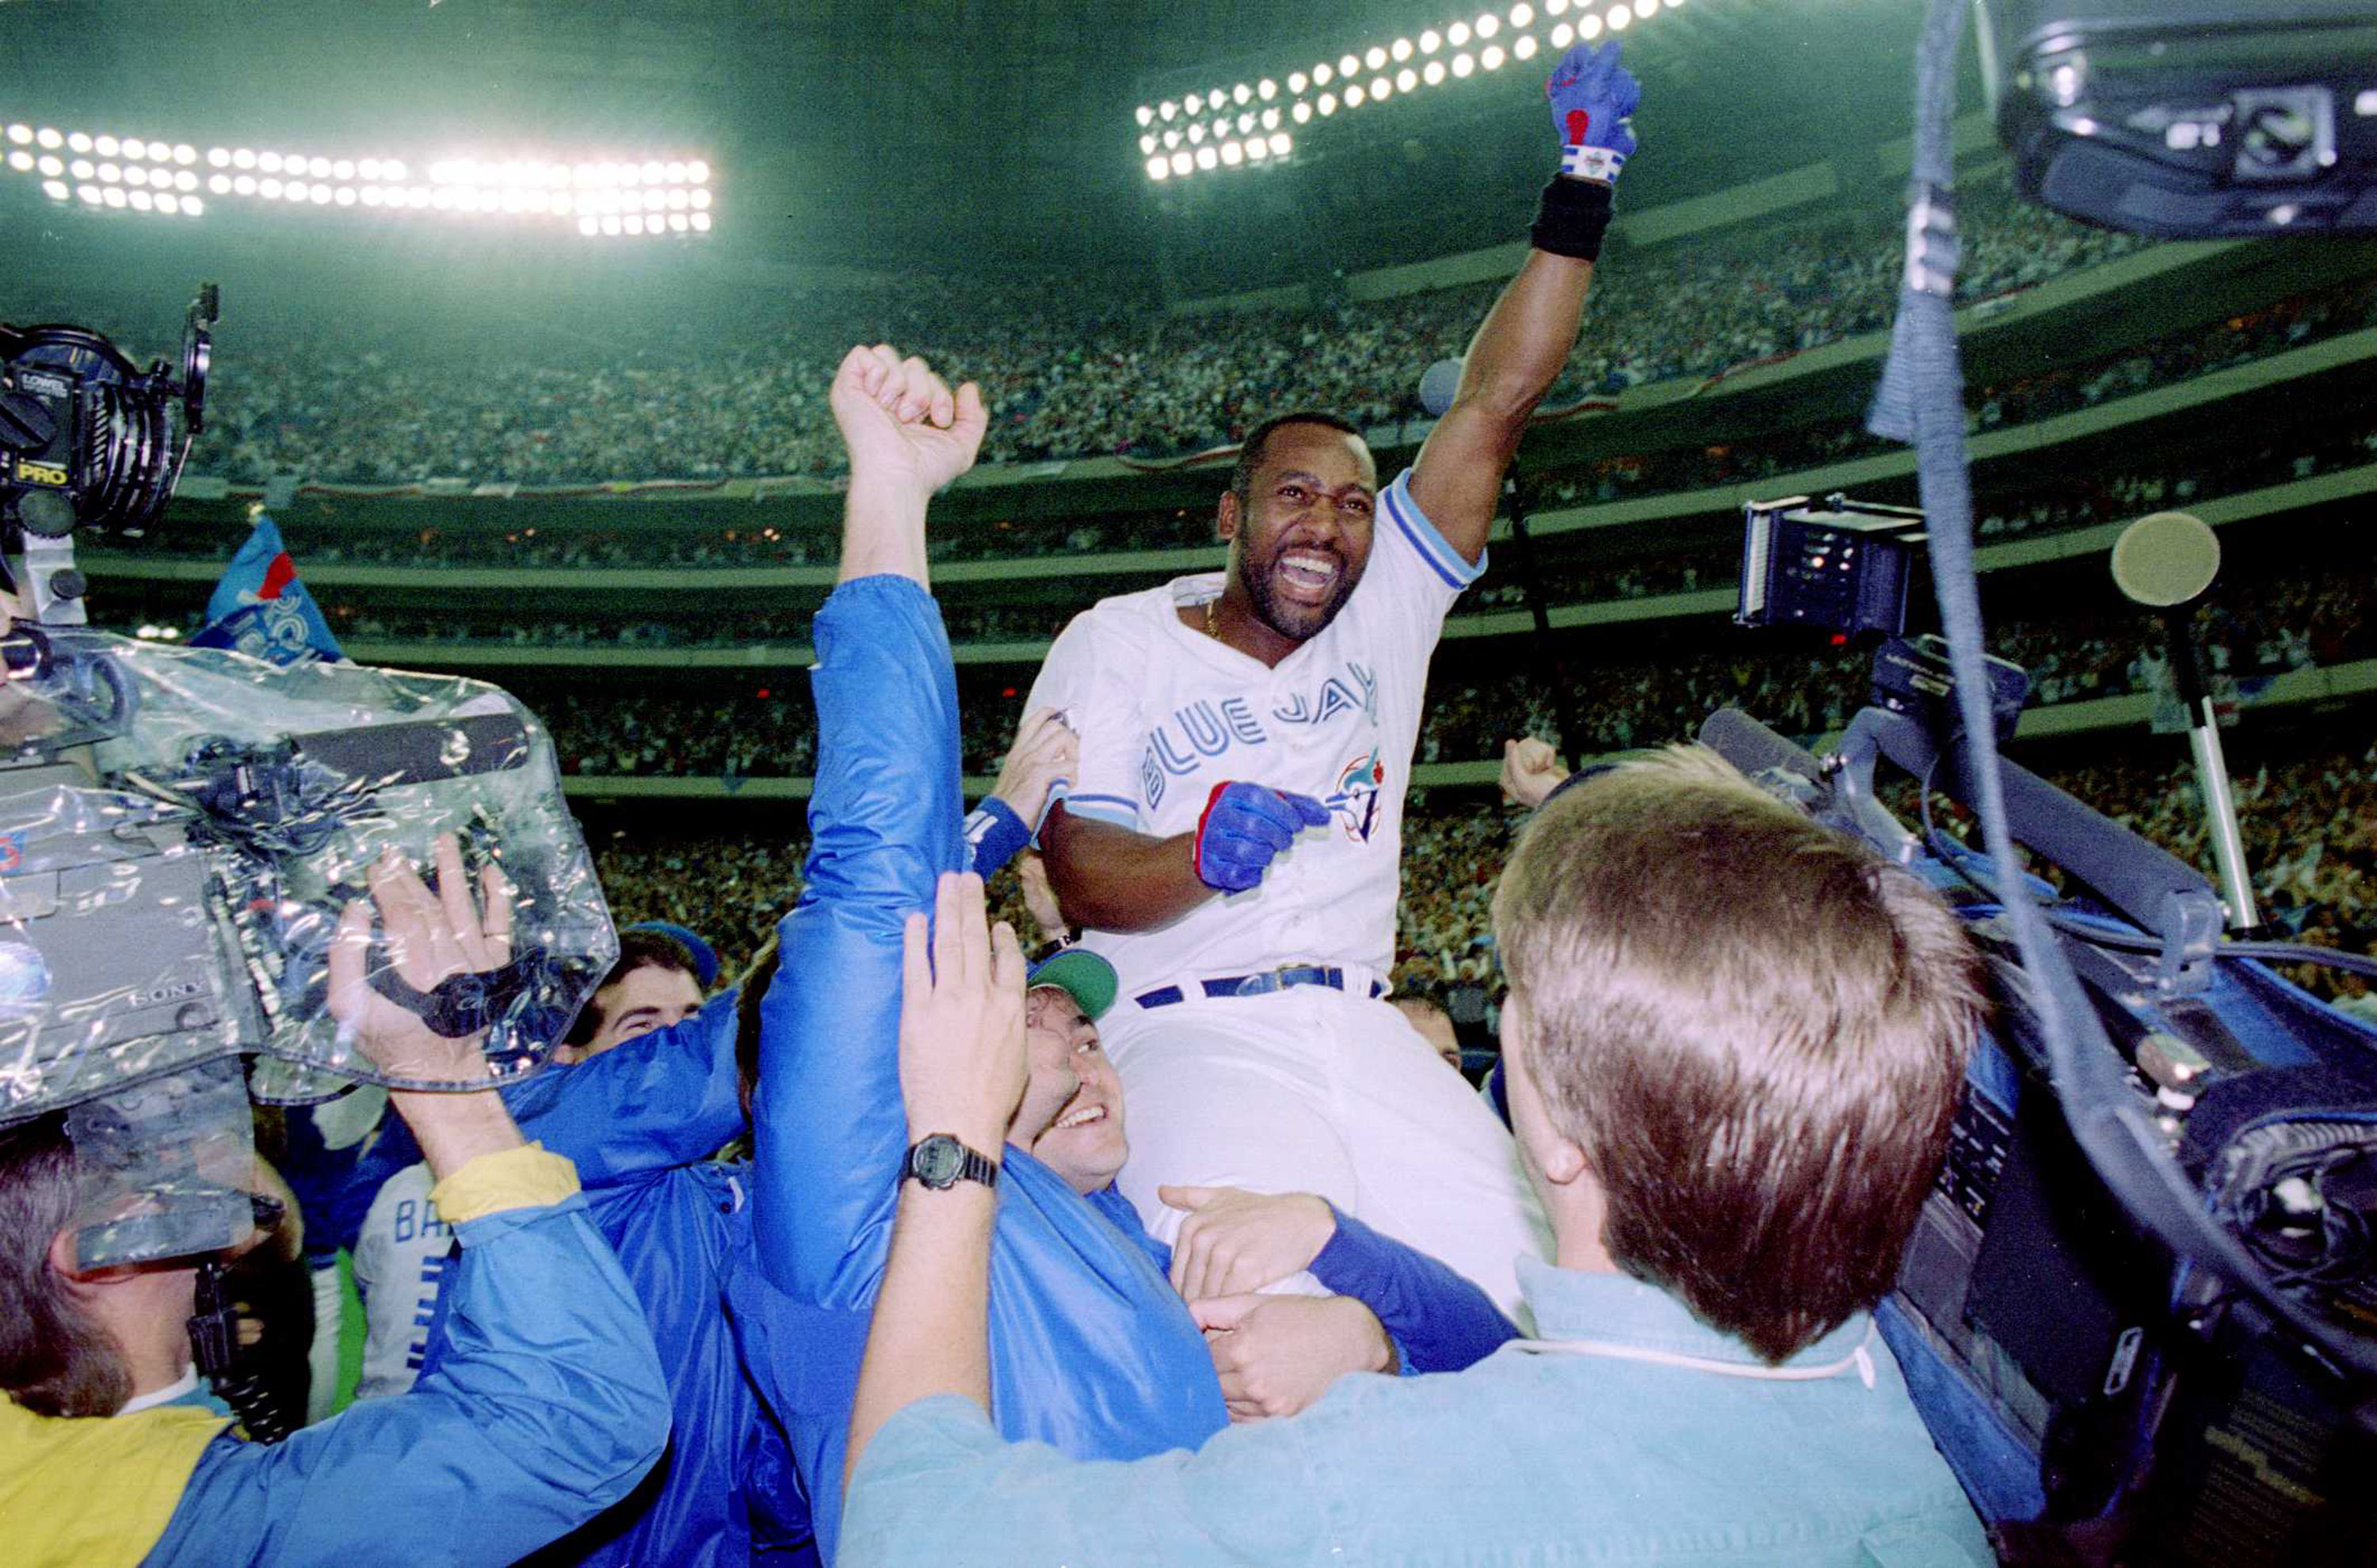 Oct. 23,1993:   Touch 'em all Joe, you'll never hit a bigger home run in your life! - Toronto Blue Jays broadcaster Tom Cheeks, after Carter delivered the 2nd ever walk-off home run to win a World series in history, against the Philadelphia Phillies.